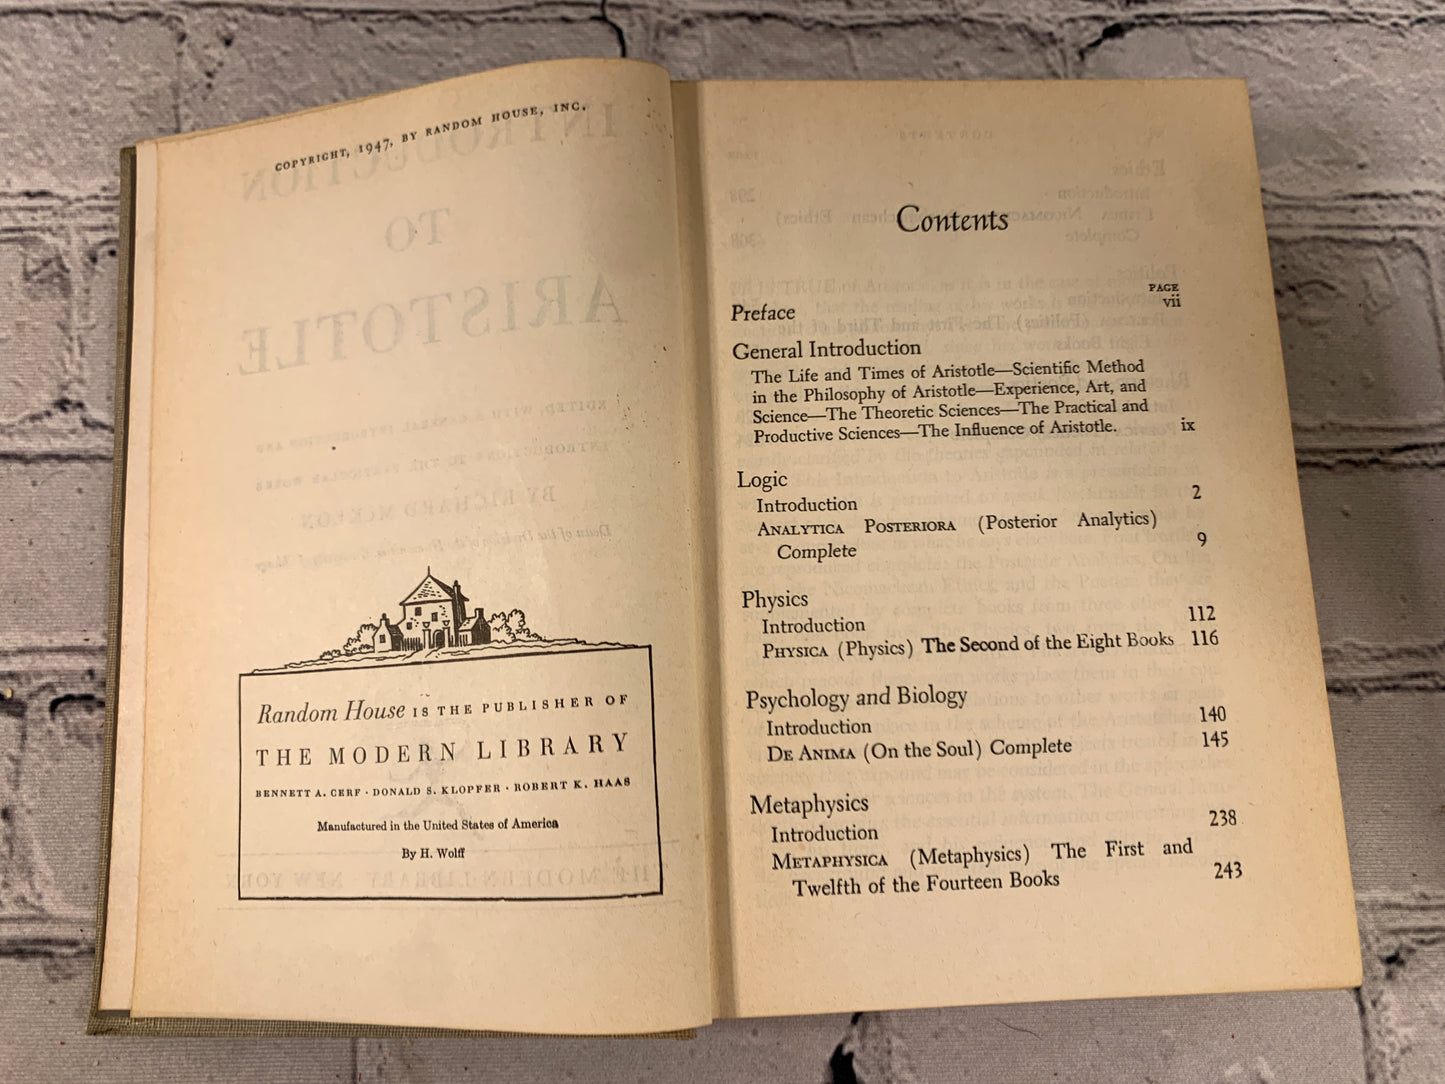 Introduction to Aristotle by Richard McKeon [1947 · Modern Library]